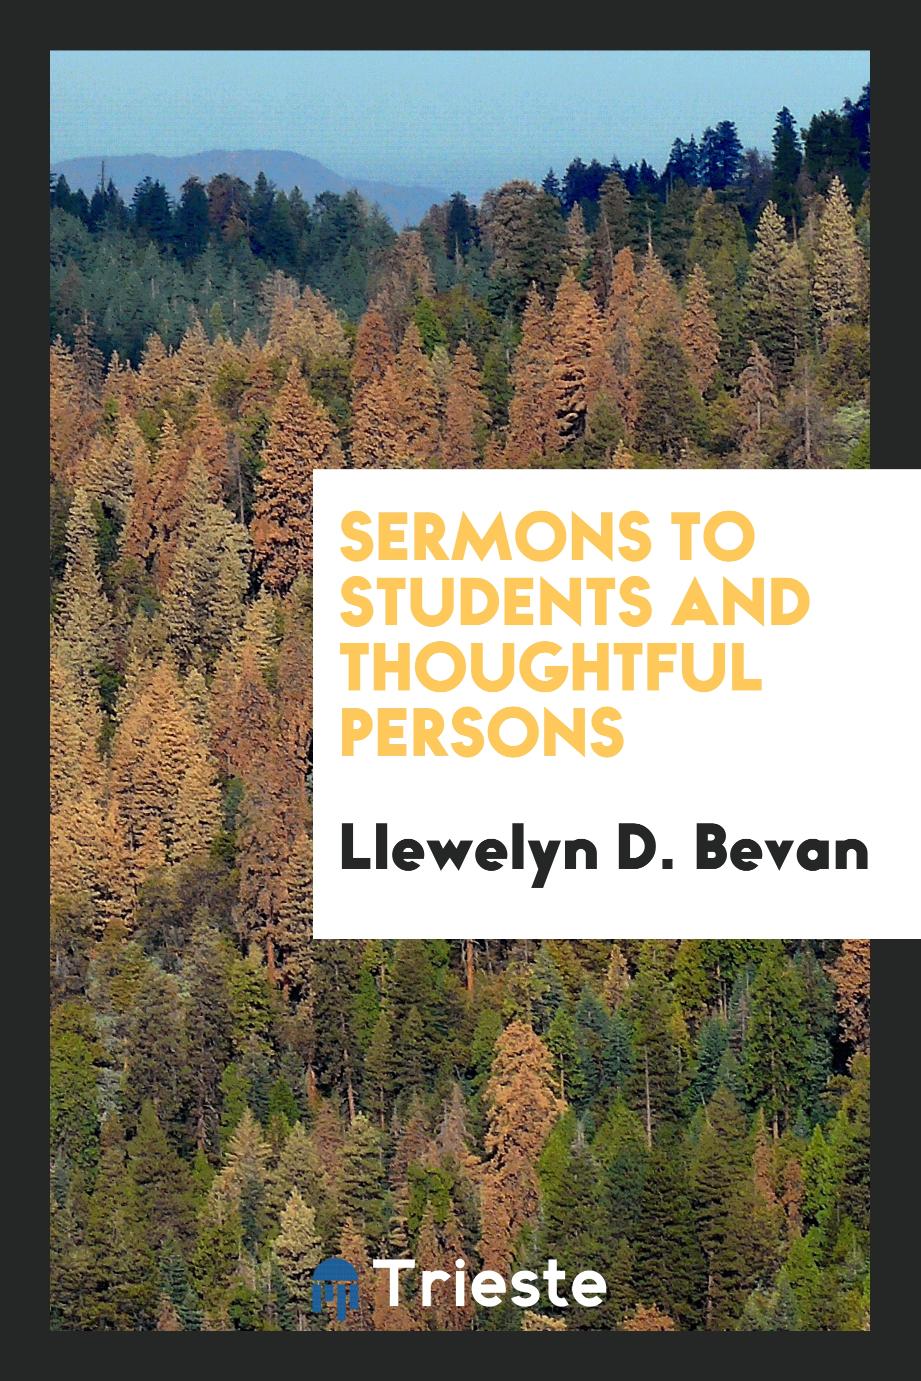 Sermons to Students and Thoughtful Persons